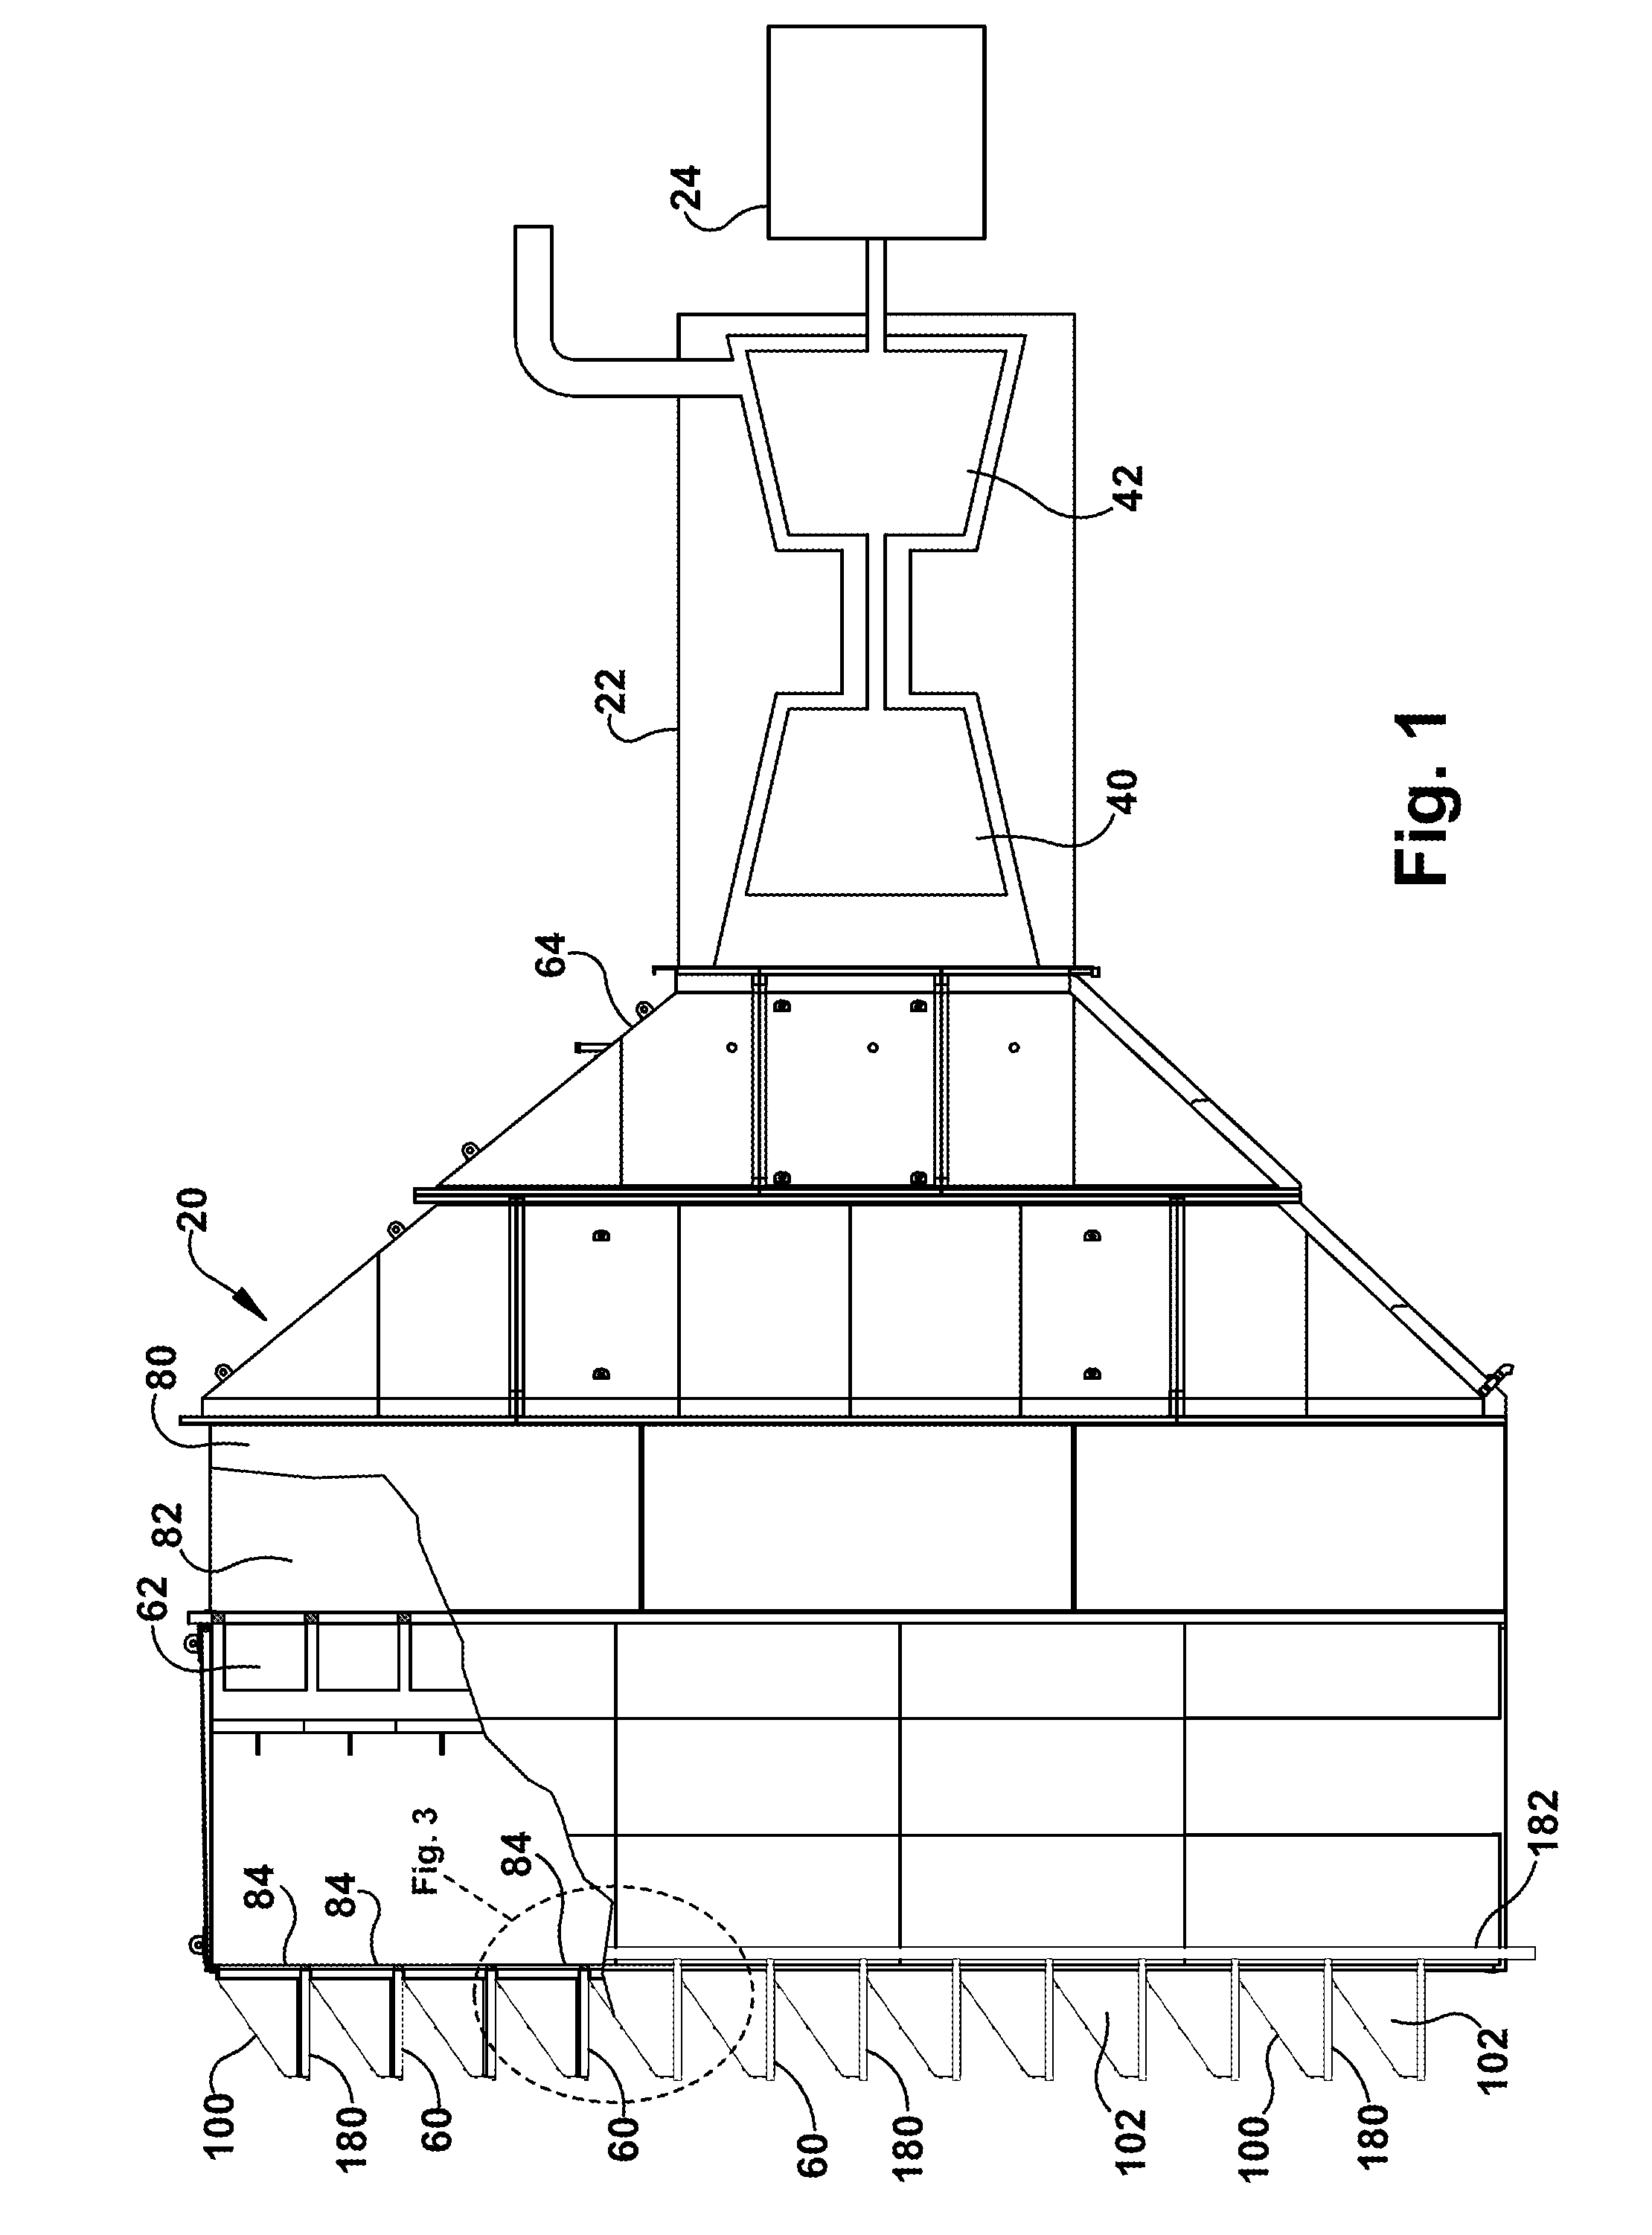 Moisture diversion apparatus for air inlet system and method